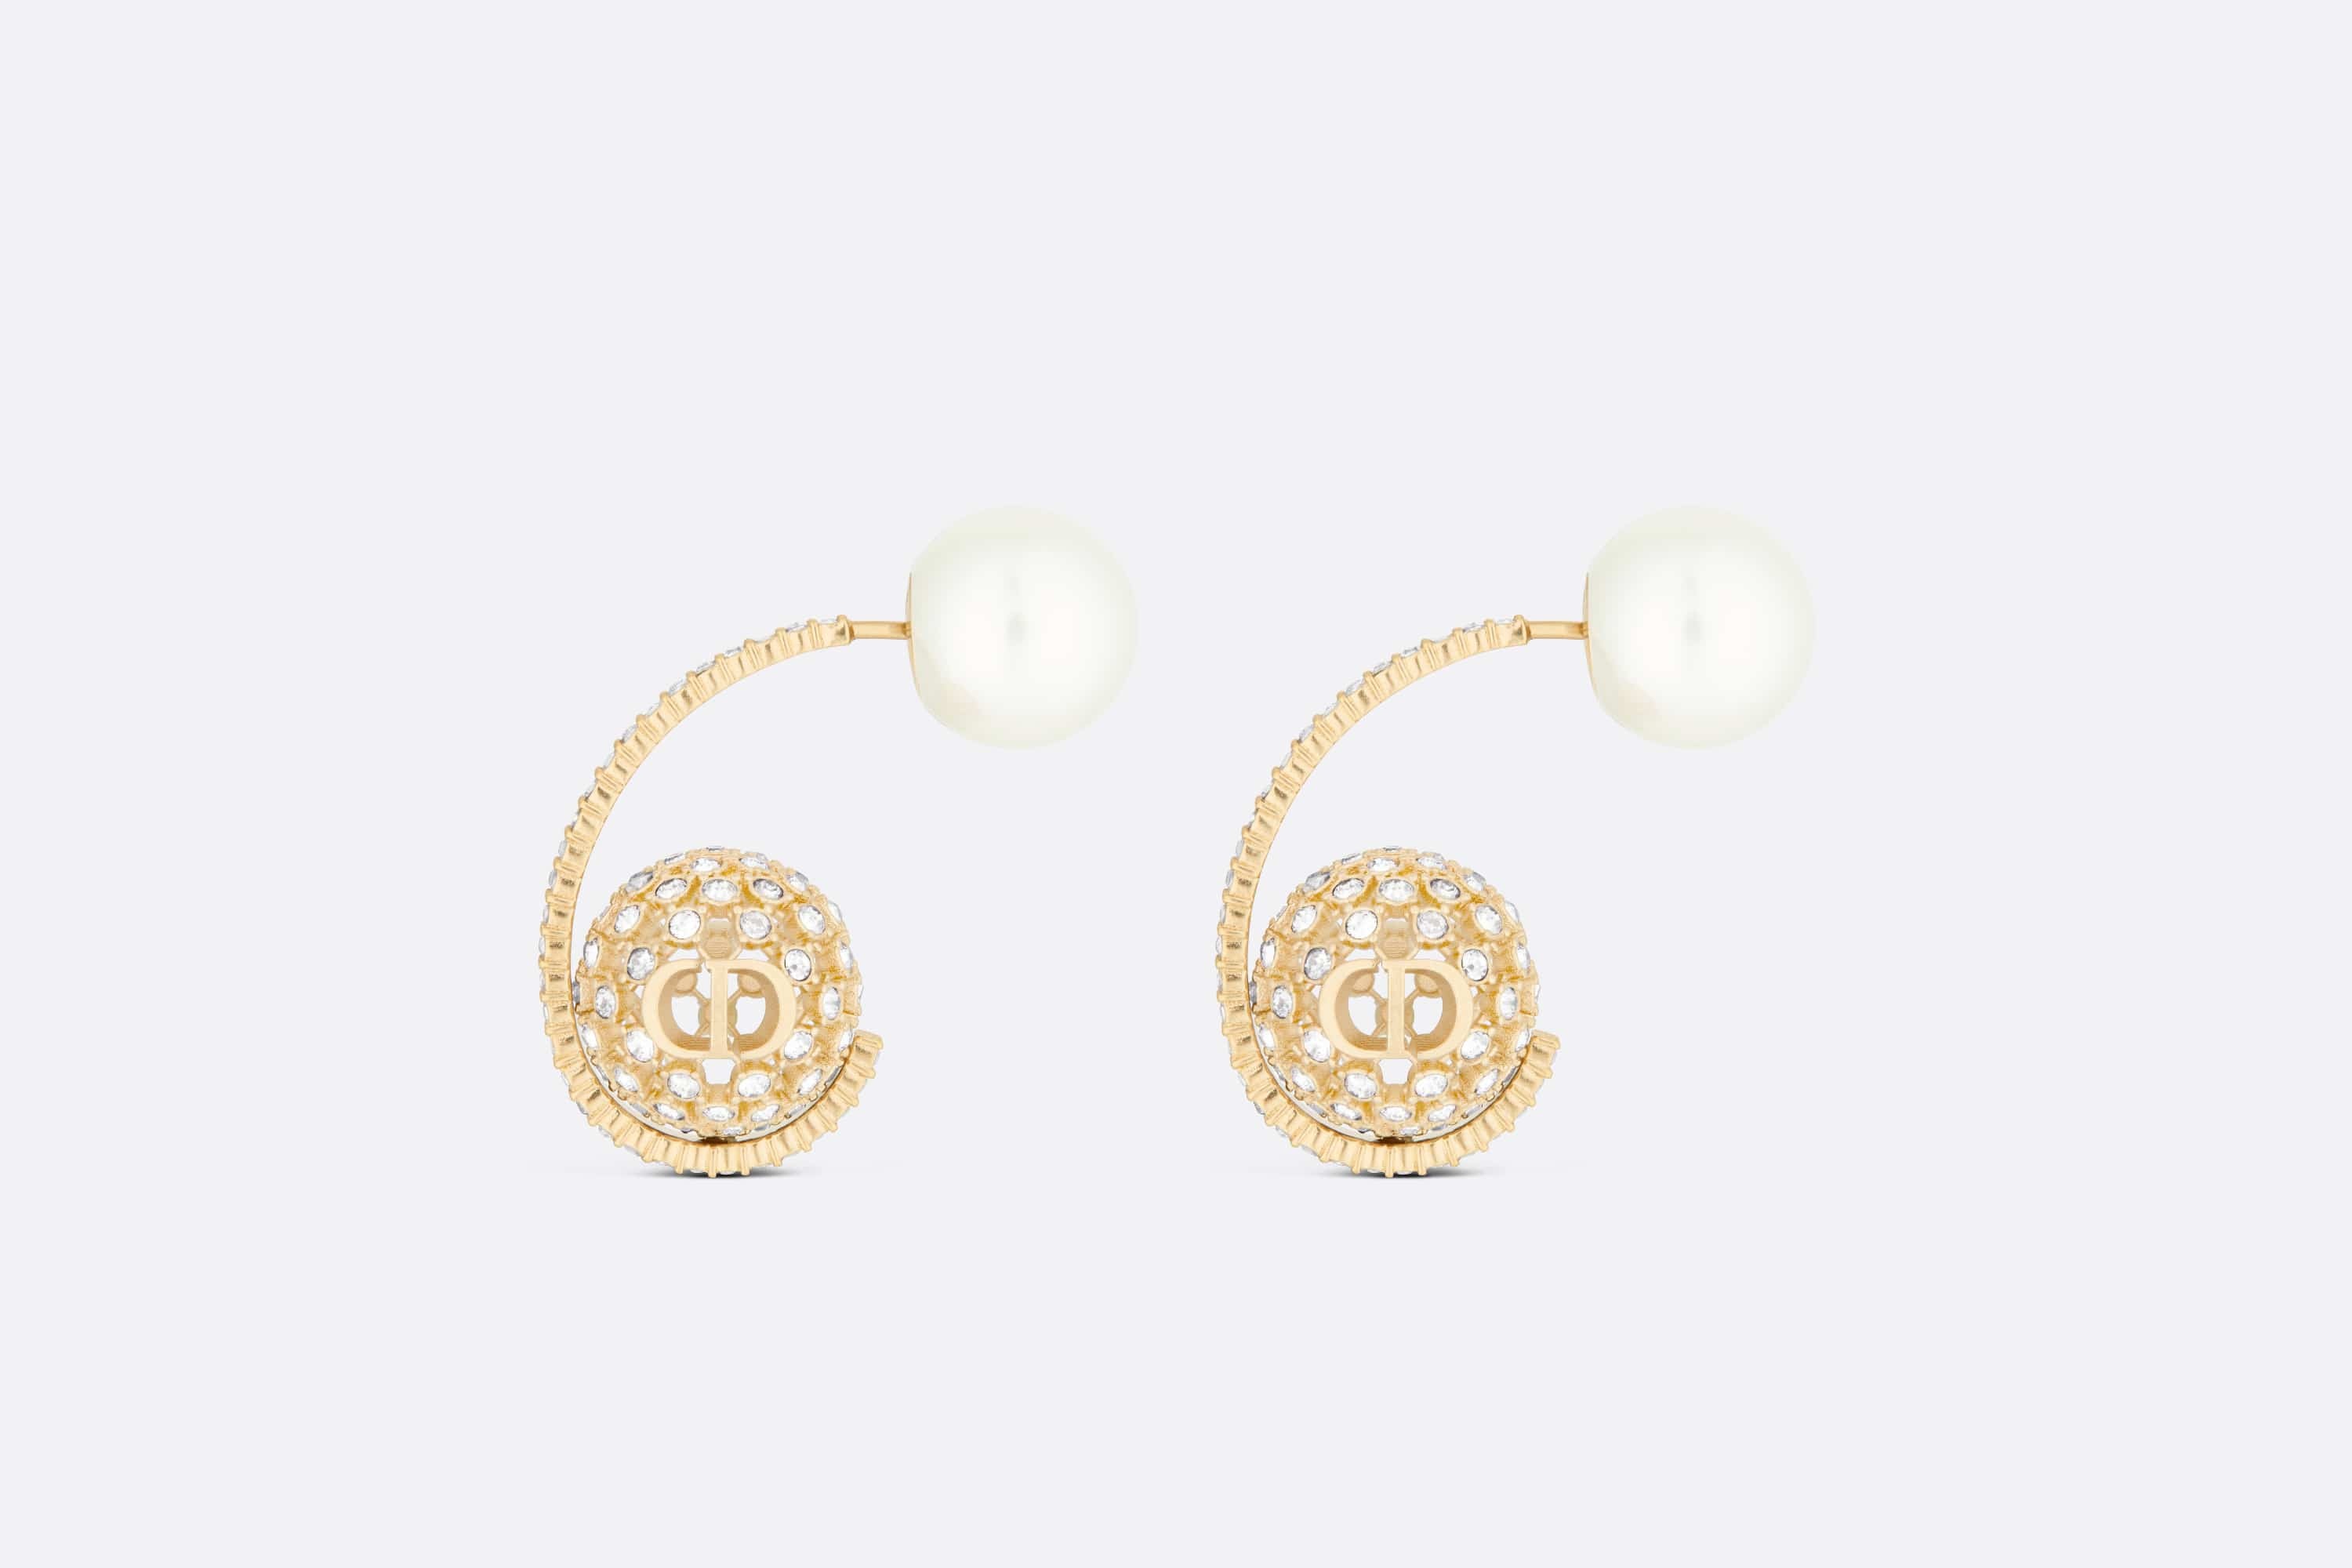 Dior Tribales Gemini Earring Gold-Finish Metal and a White Resin